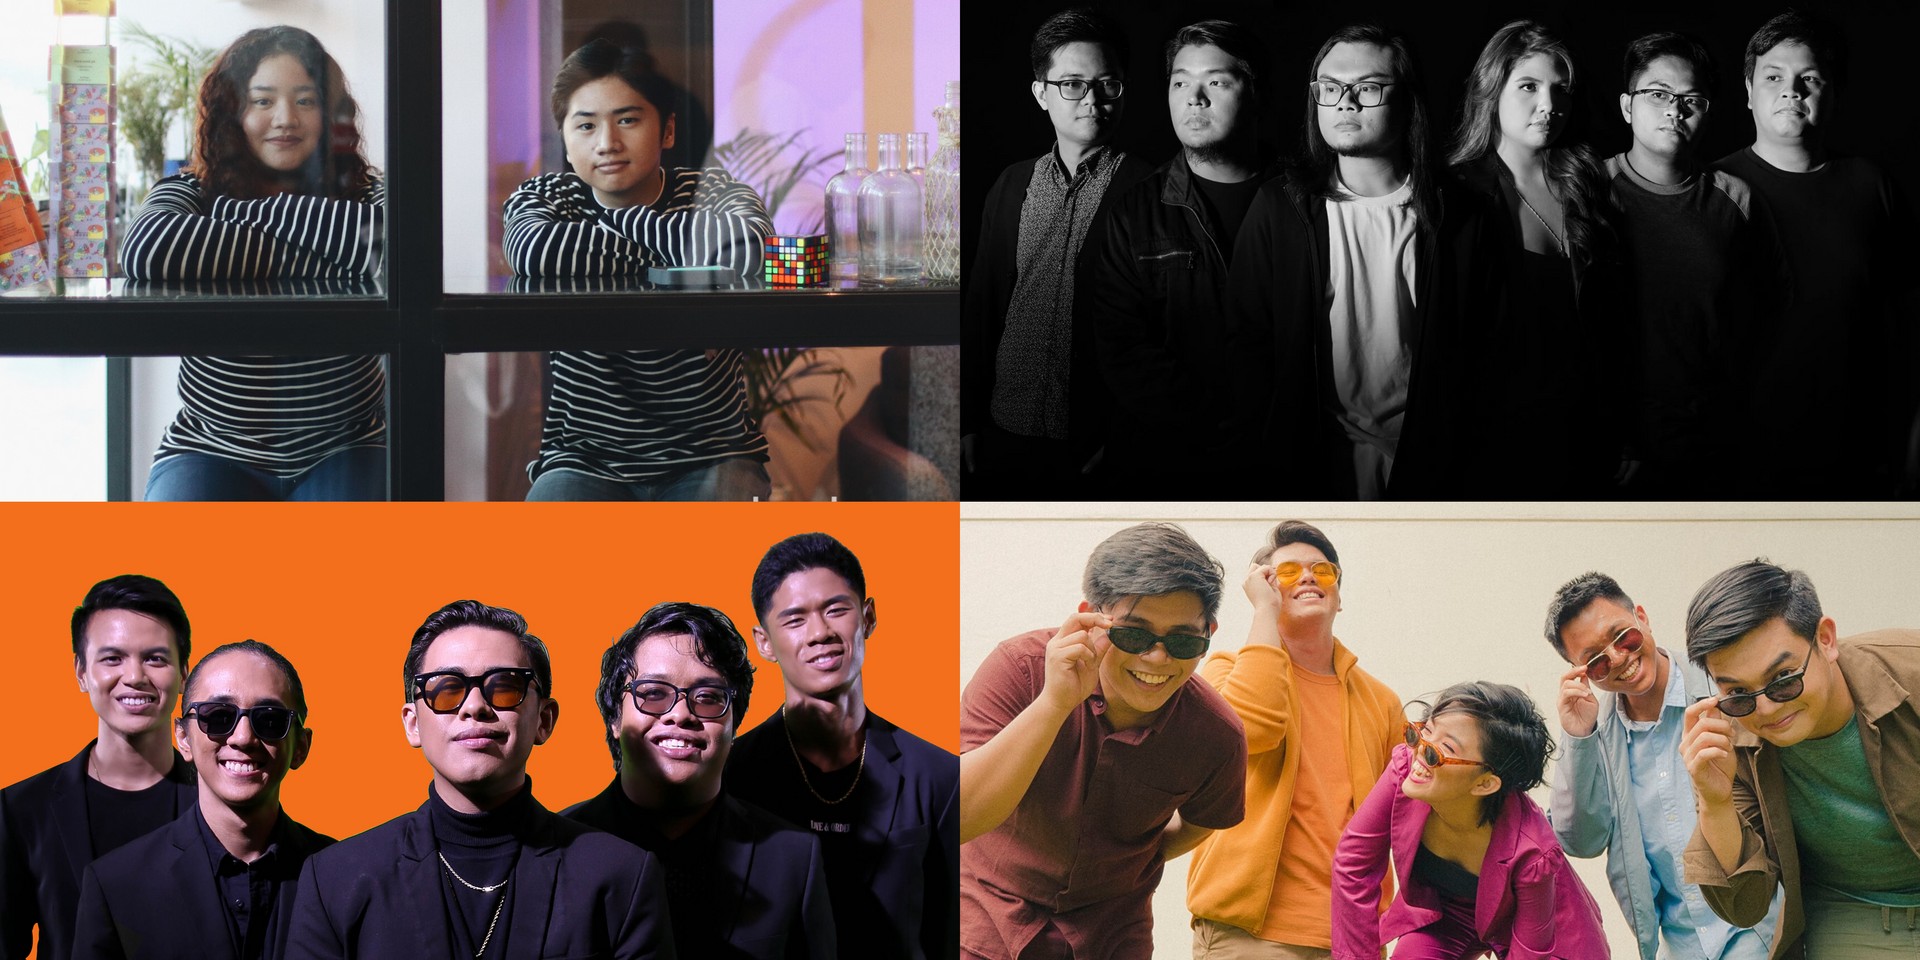 Autotelic, Ysanygo, Any Name's Okay, and more added to Tagaytay Art Beat 4 lineup